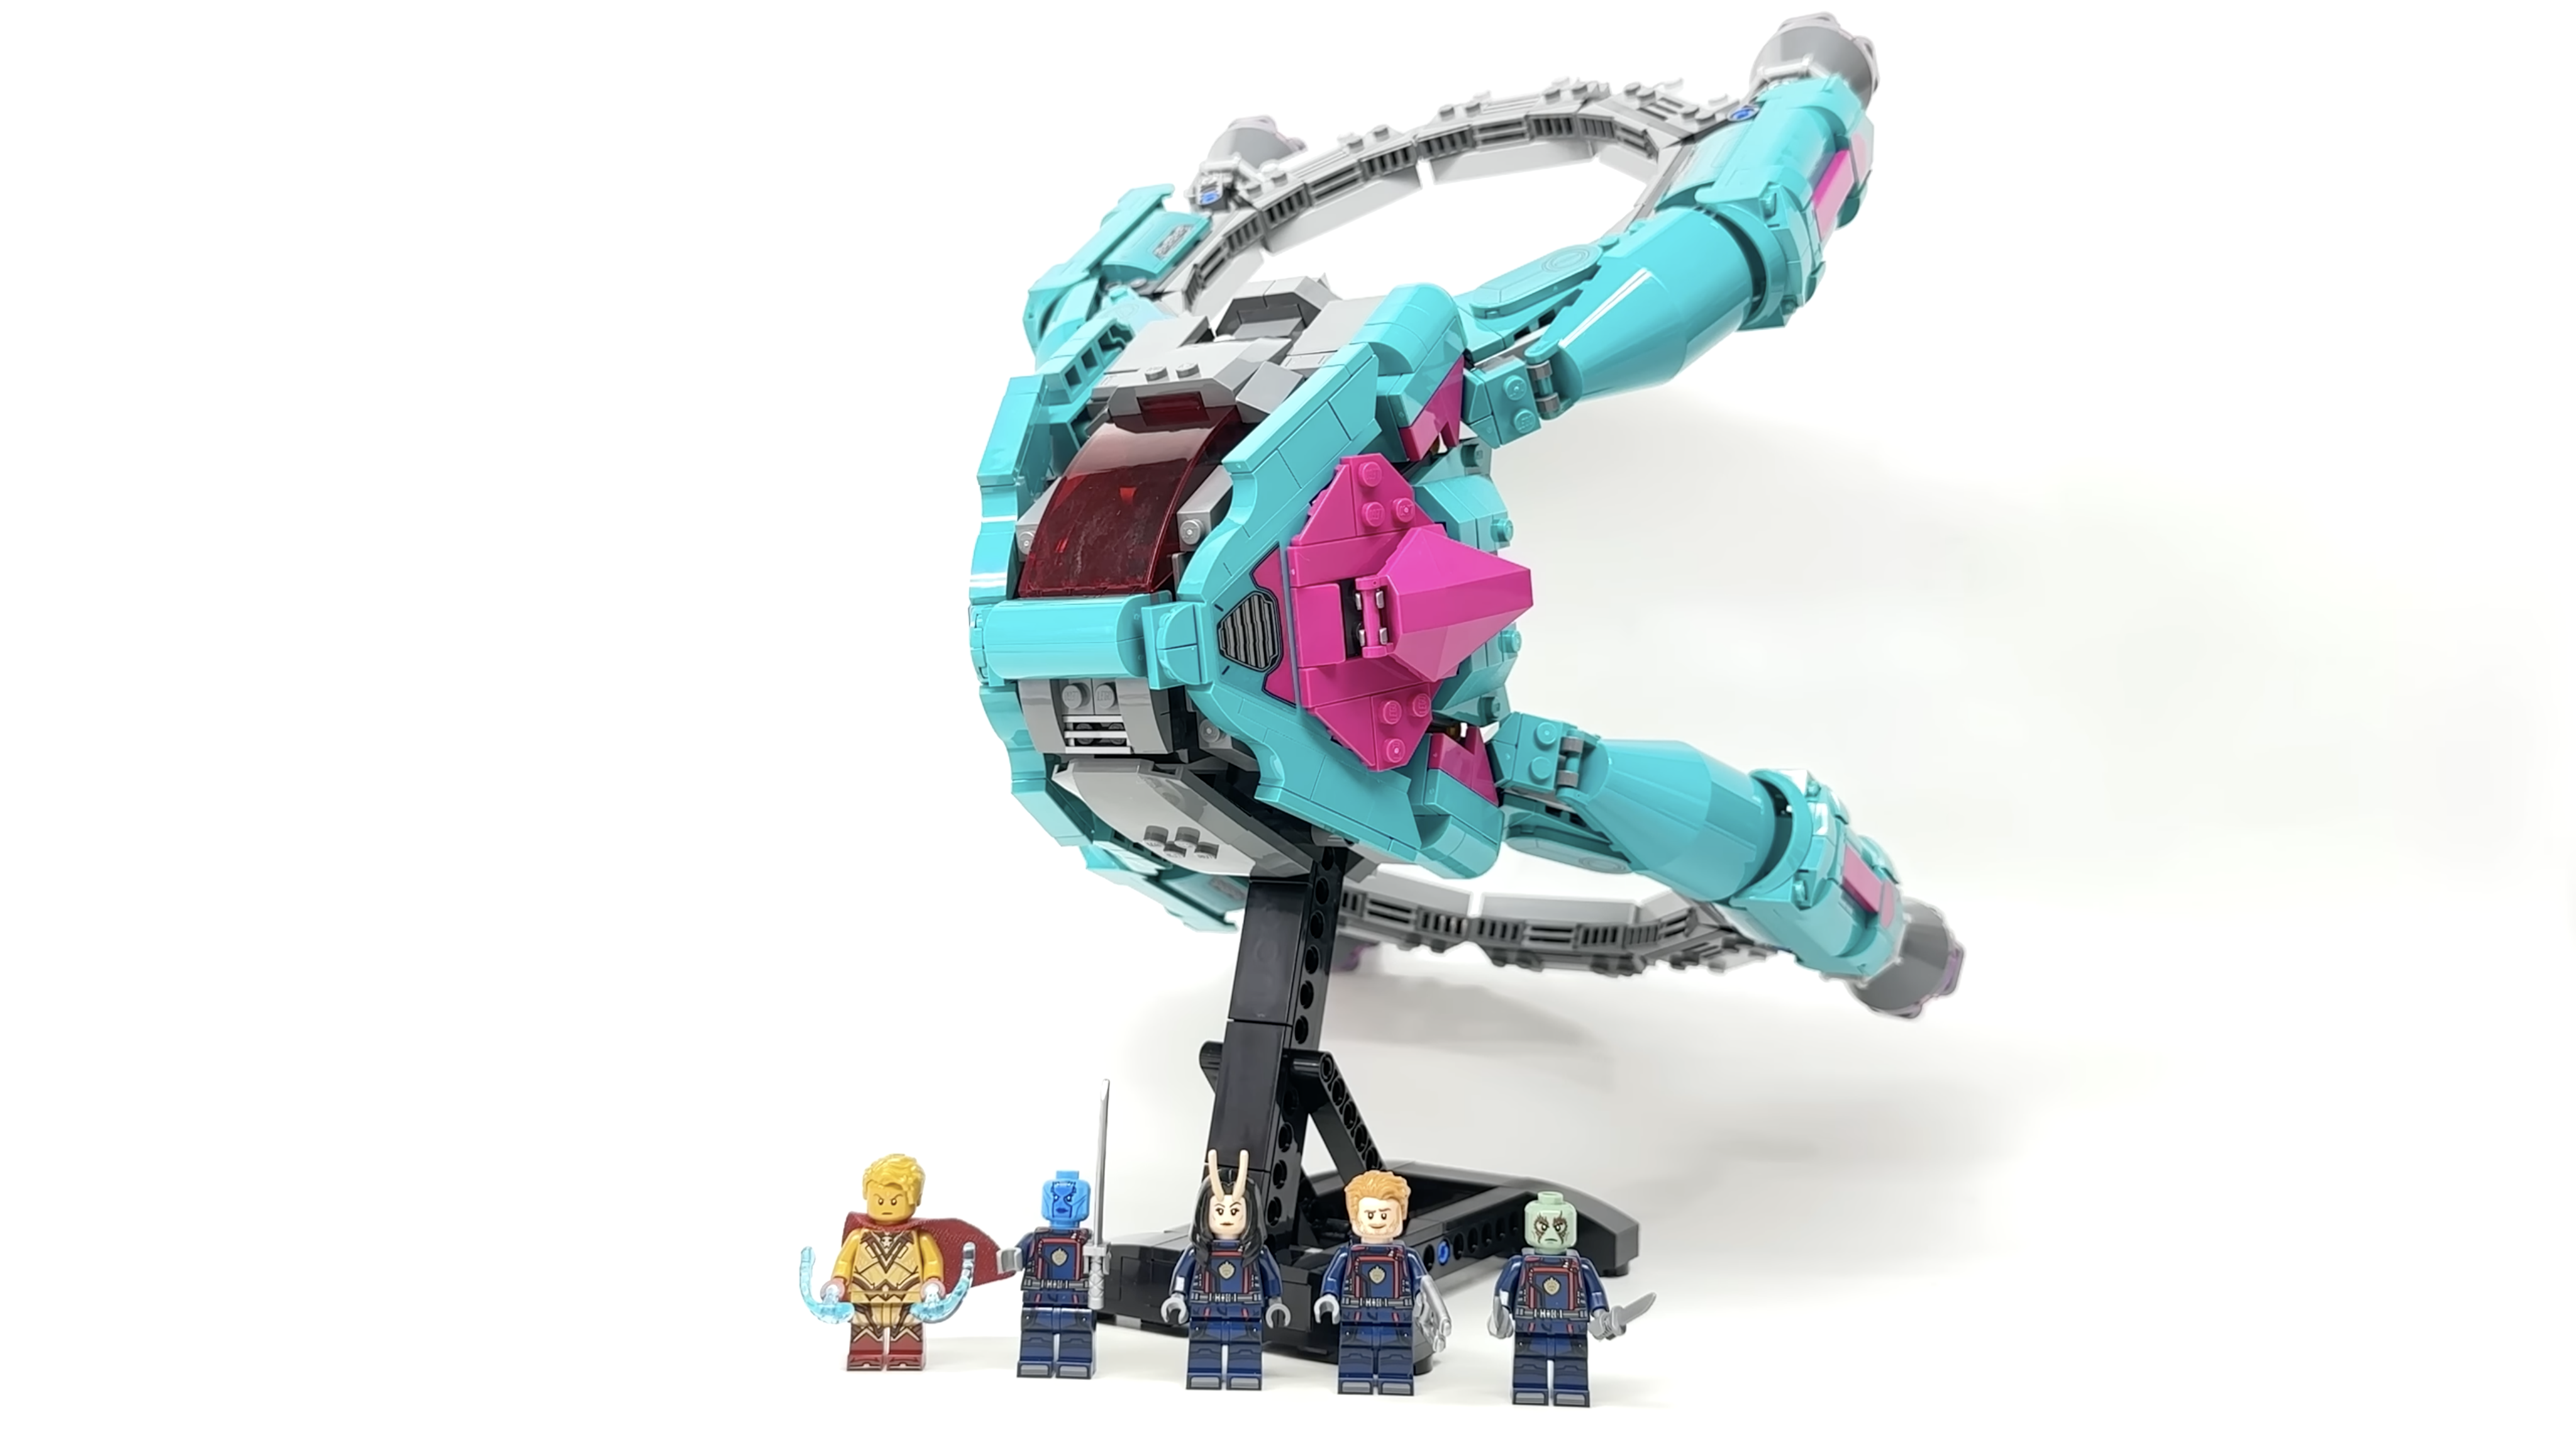 LEGO Marvel Super Heroes The New Guardians' Ship 76255 by LEGO Systems Inc.